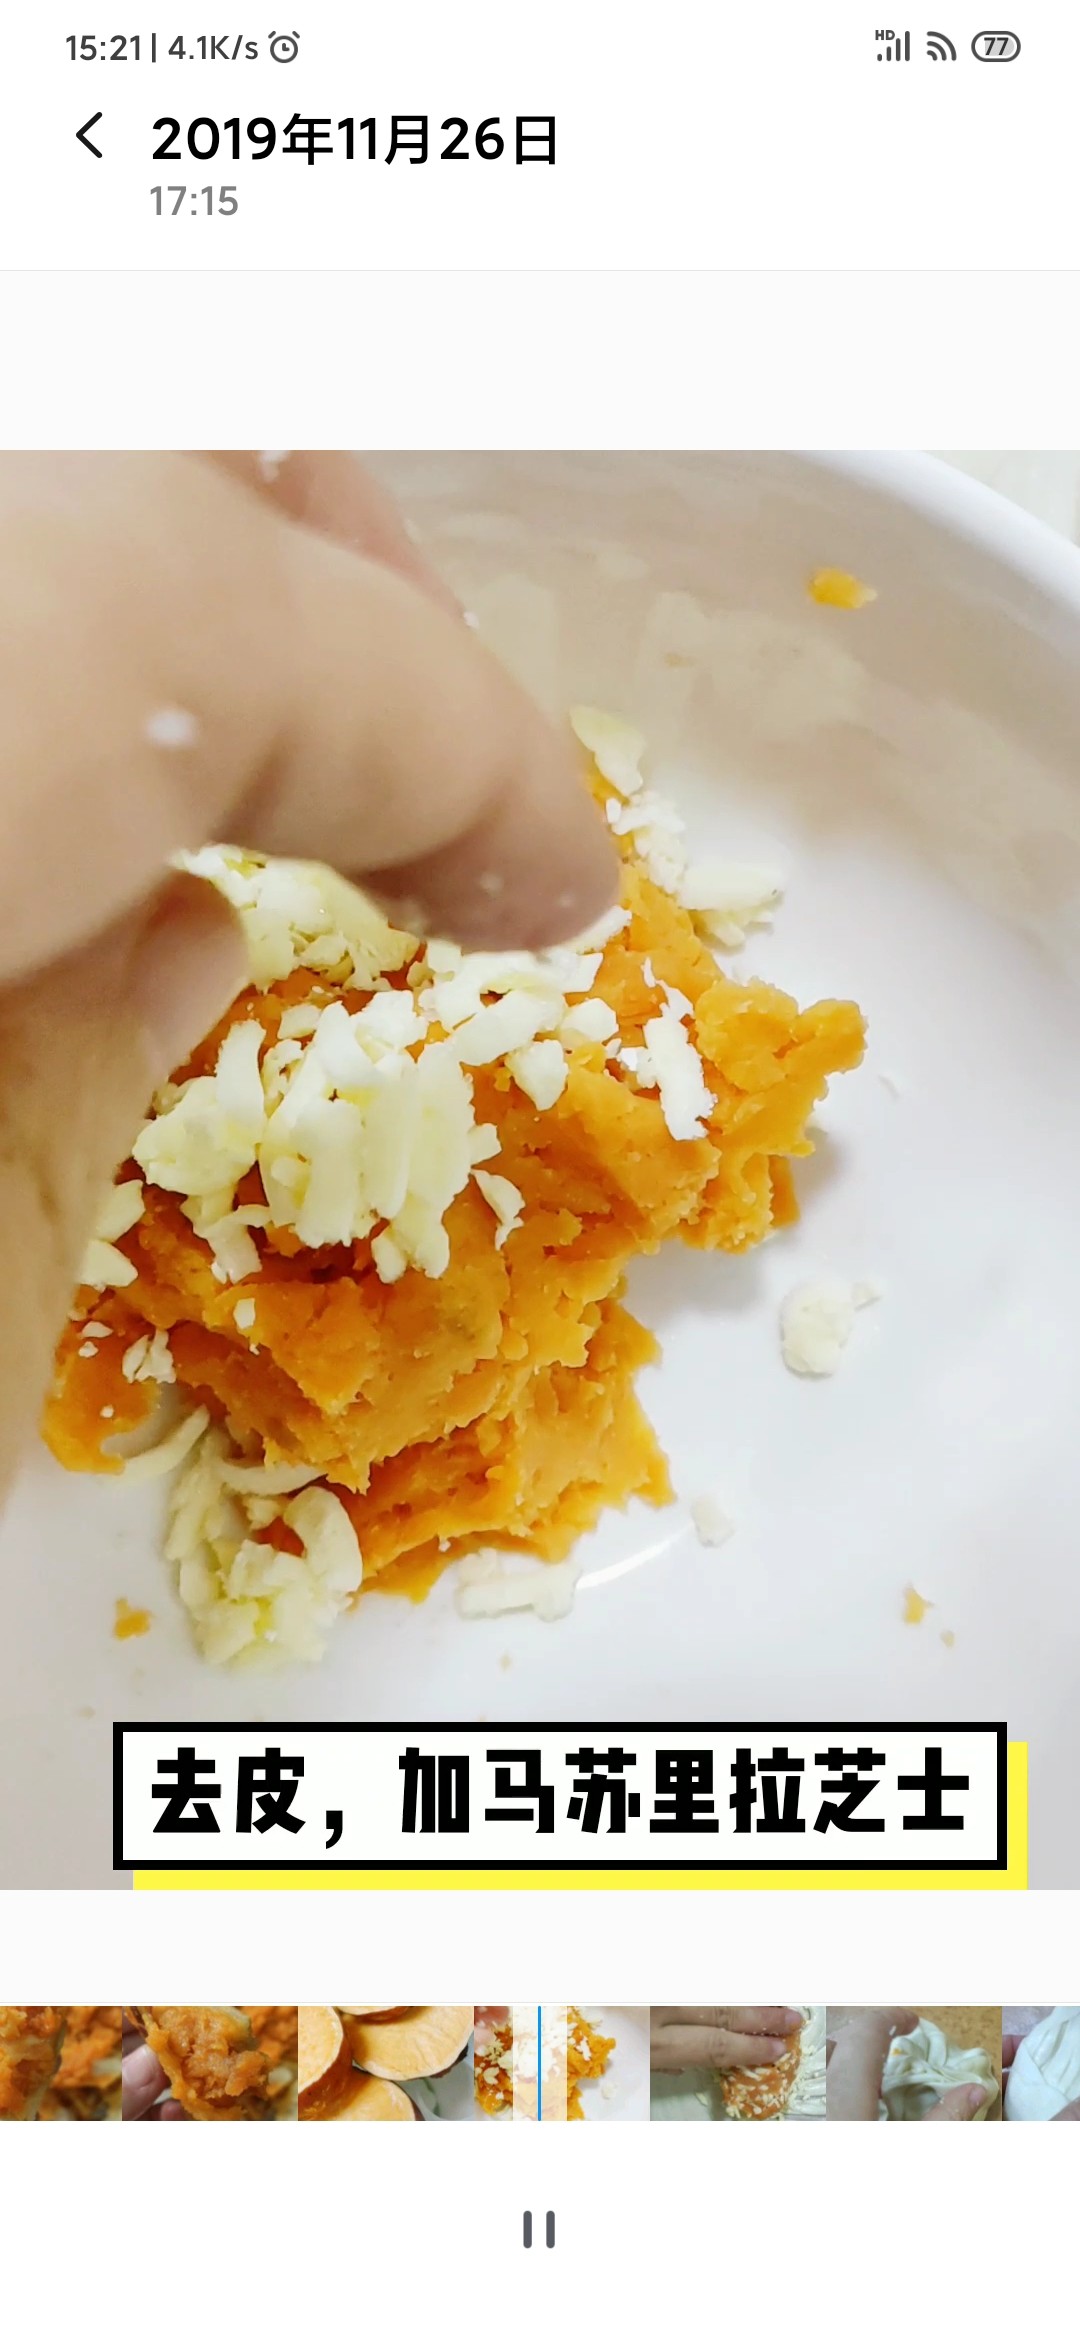 Creamy Cheese Sweet Potato Cake ❗️it's Delicious to Deep Fried ❗️ recipe